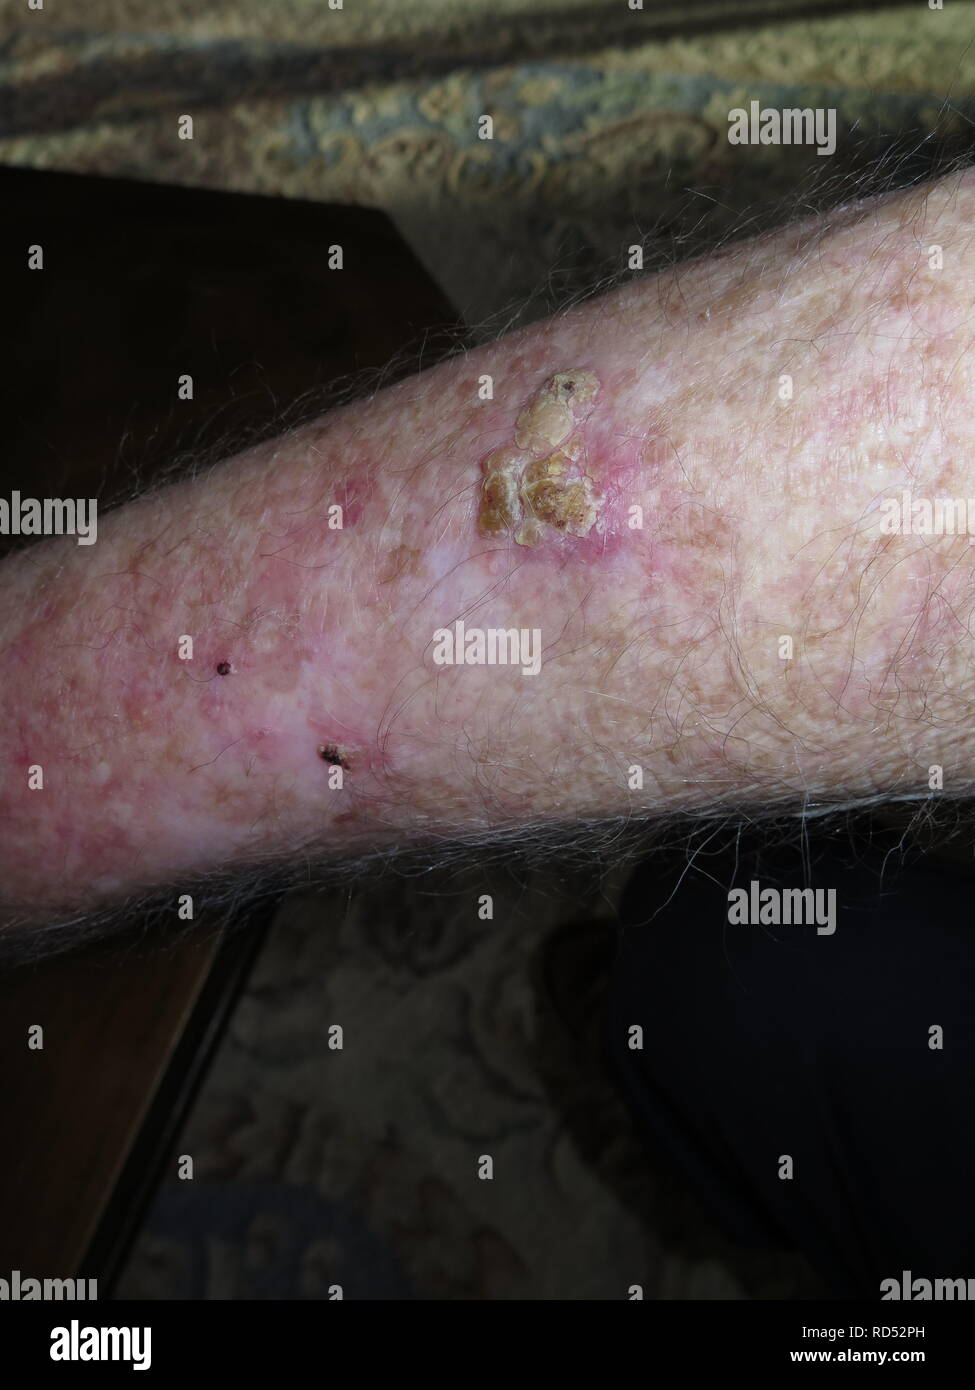 Skin Merkel cell cancer on arm and head of male patient Stock Photo